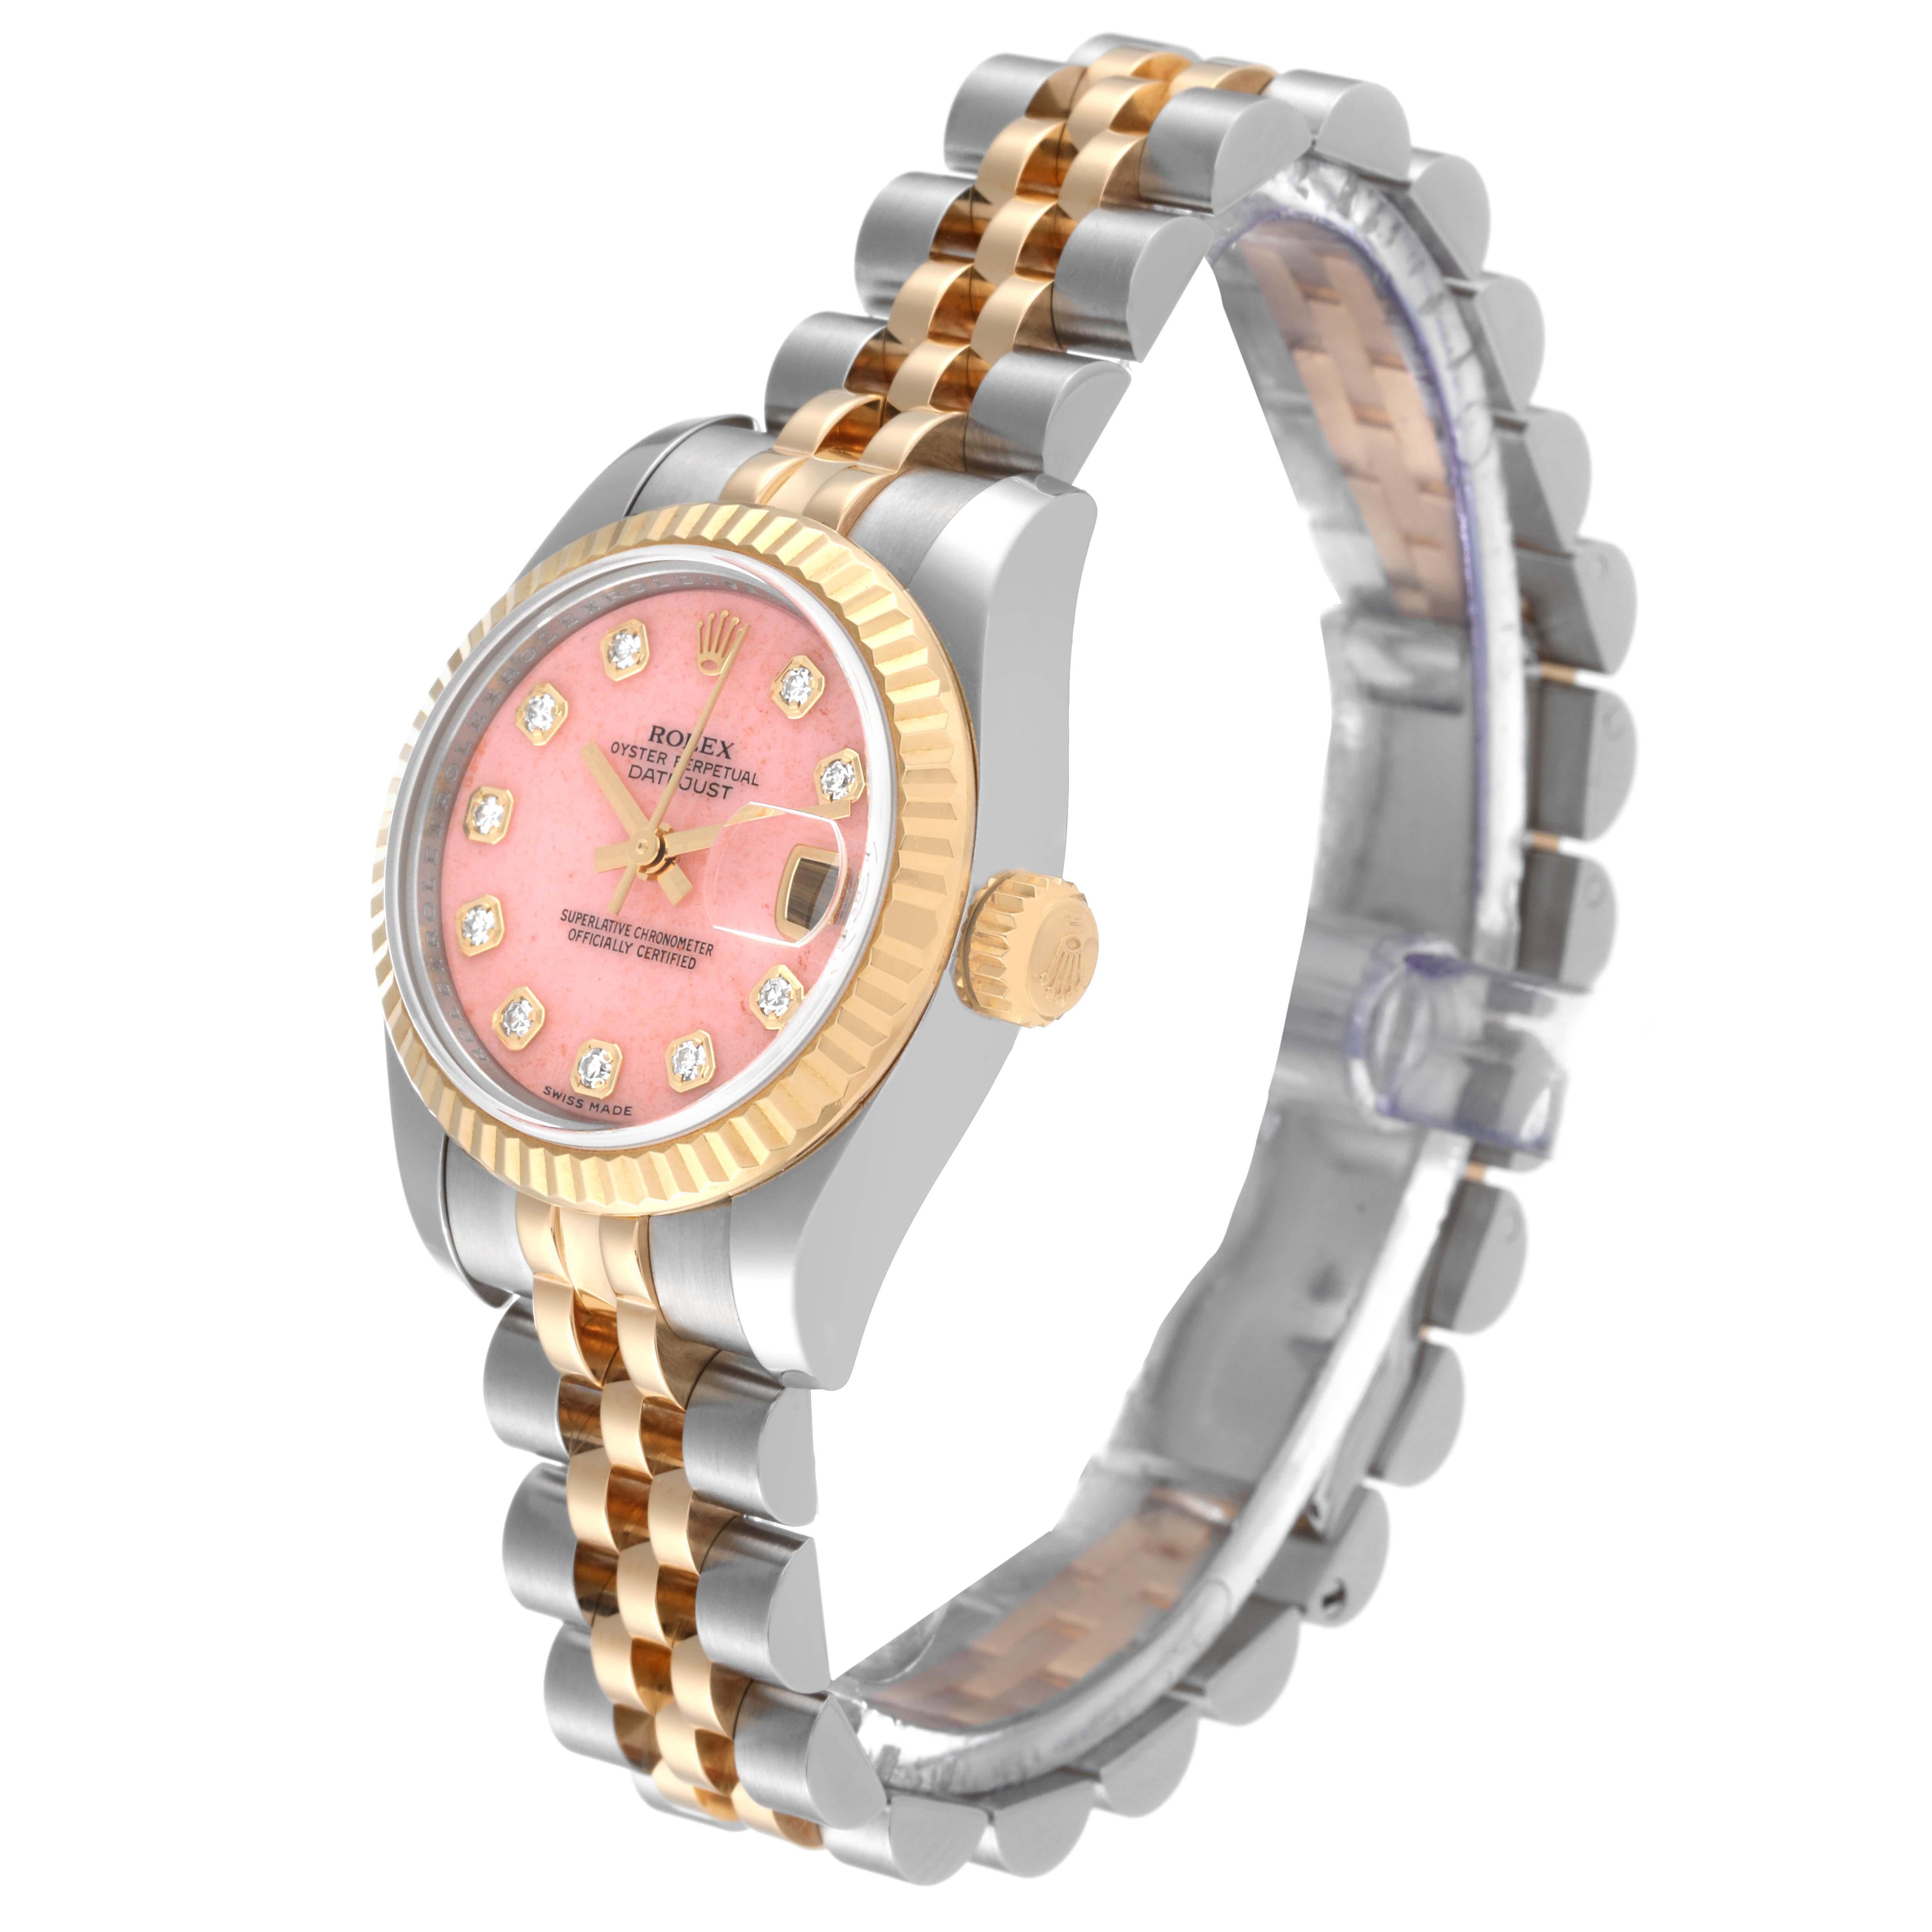 Women's Rolex Datejust Steel Yellow Gold Coral Diamond Dial Ladies Watch 179173 For Sale